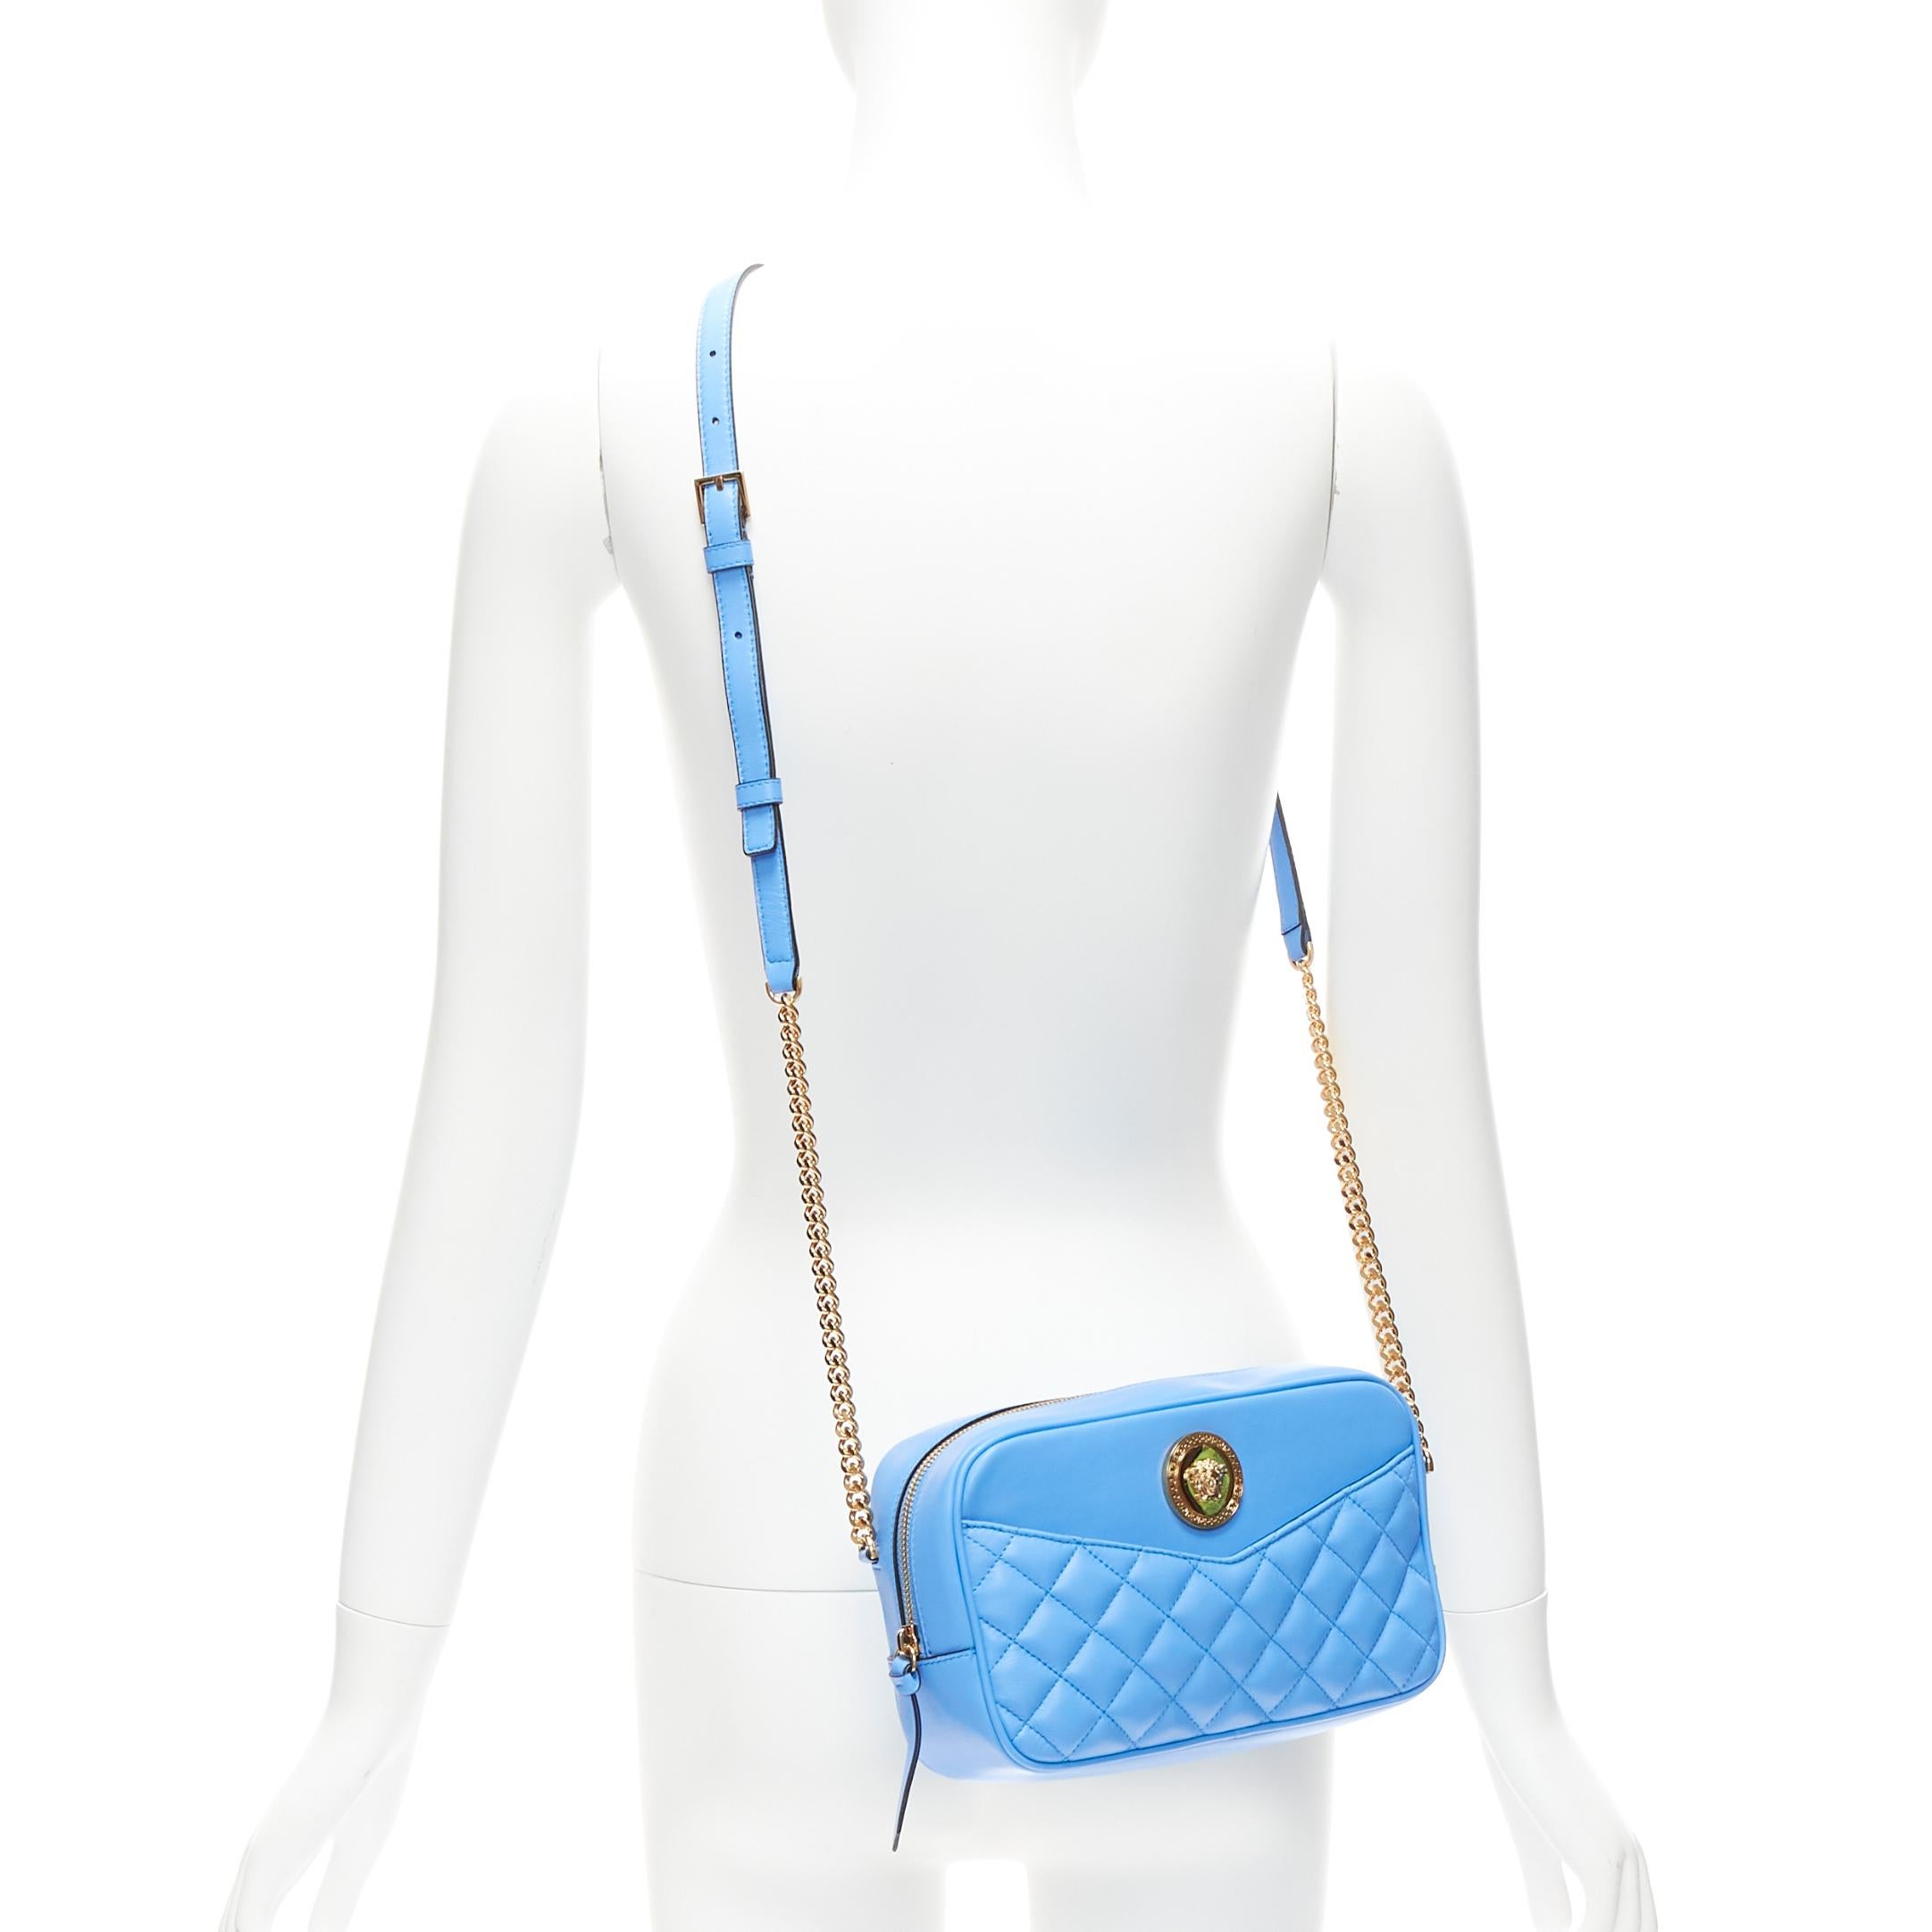 VERSACE blue lambskin leather quilted gold Medusa chain crossbody bag Medium
Reference: TGAS/D00819
Brand: Versace
Designer: Donatella Versace
Model: 1008828 1A03912 1V57V
Collection: Tribute
Material: Lambskin Leather, Metal
Color: Blue,